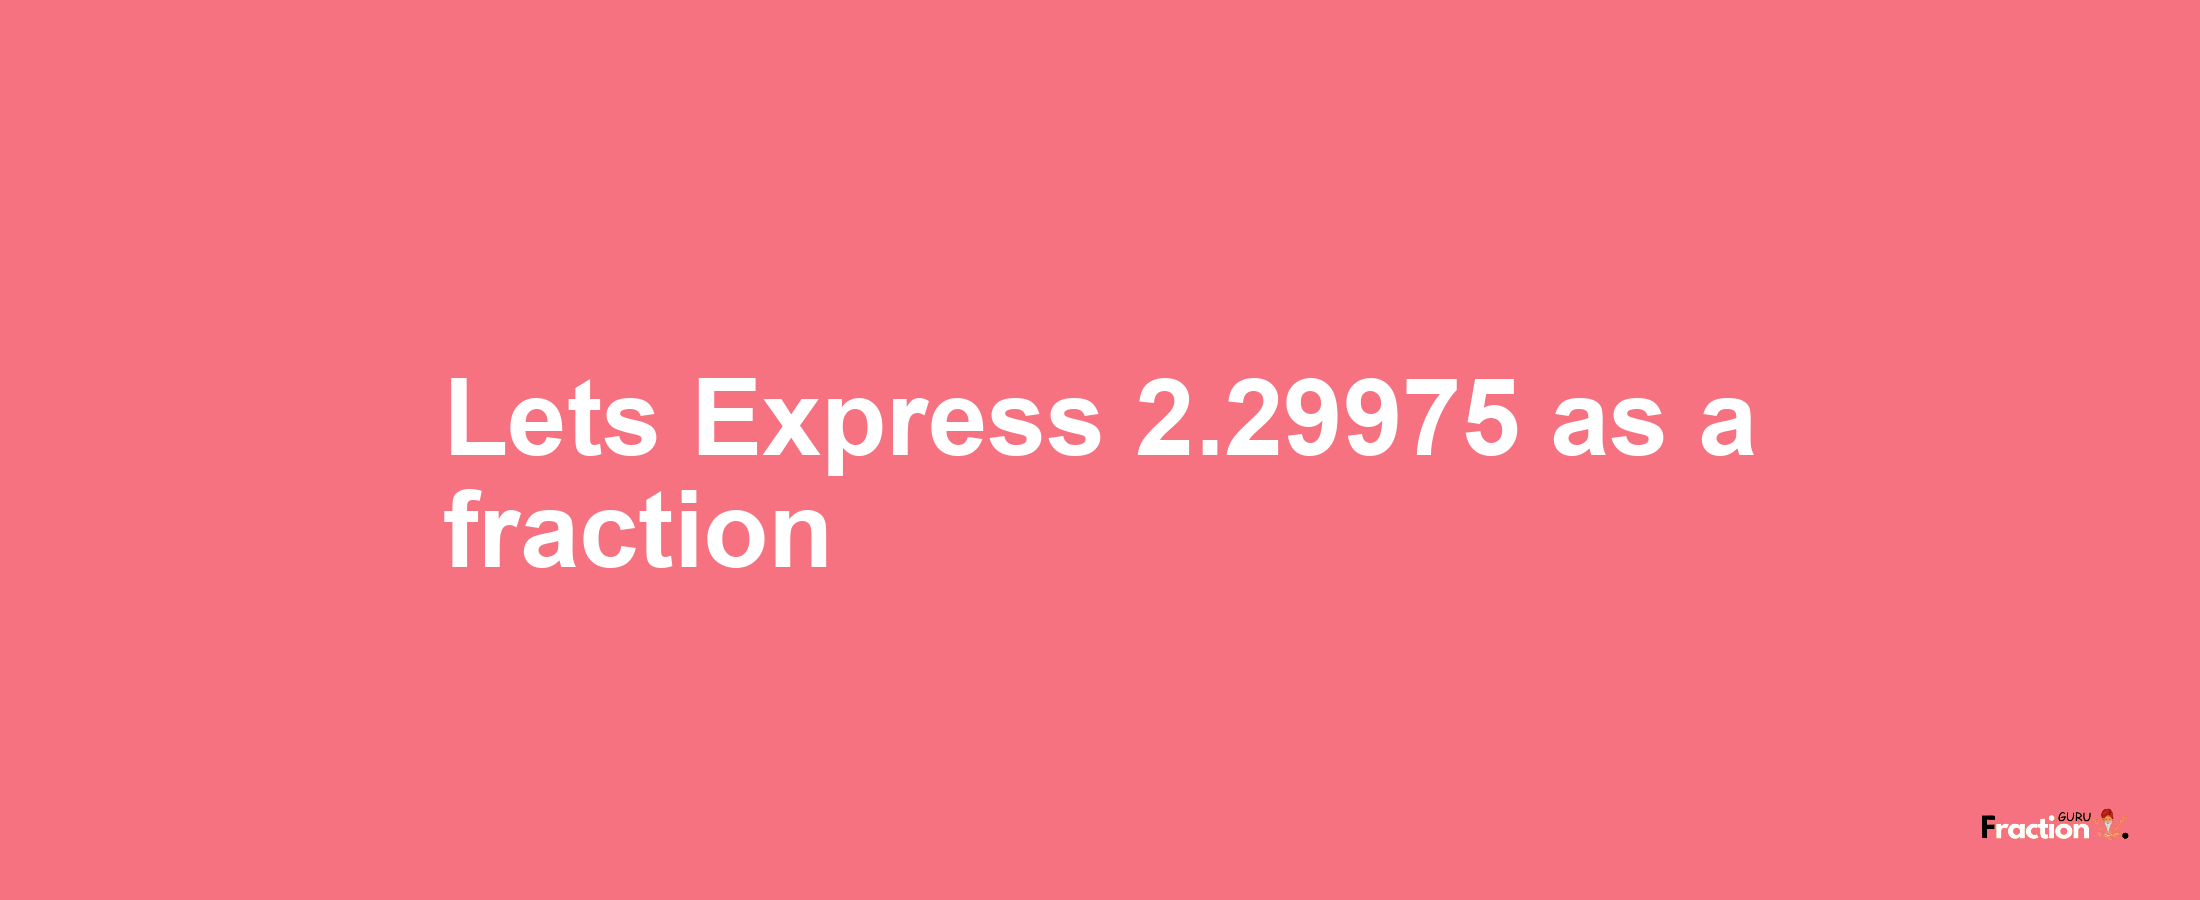 Lets Express 2.29975 as afraction